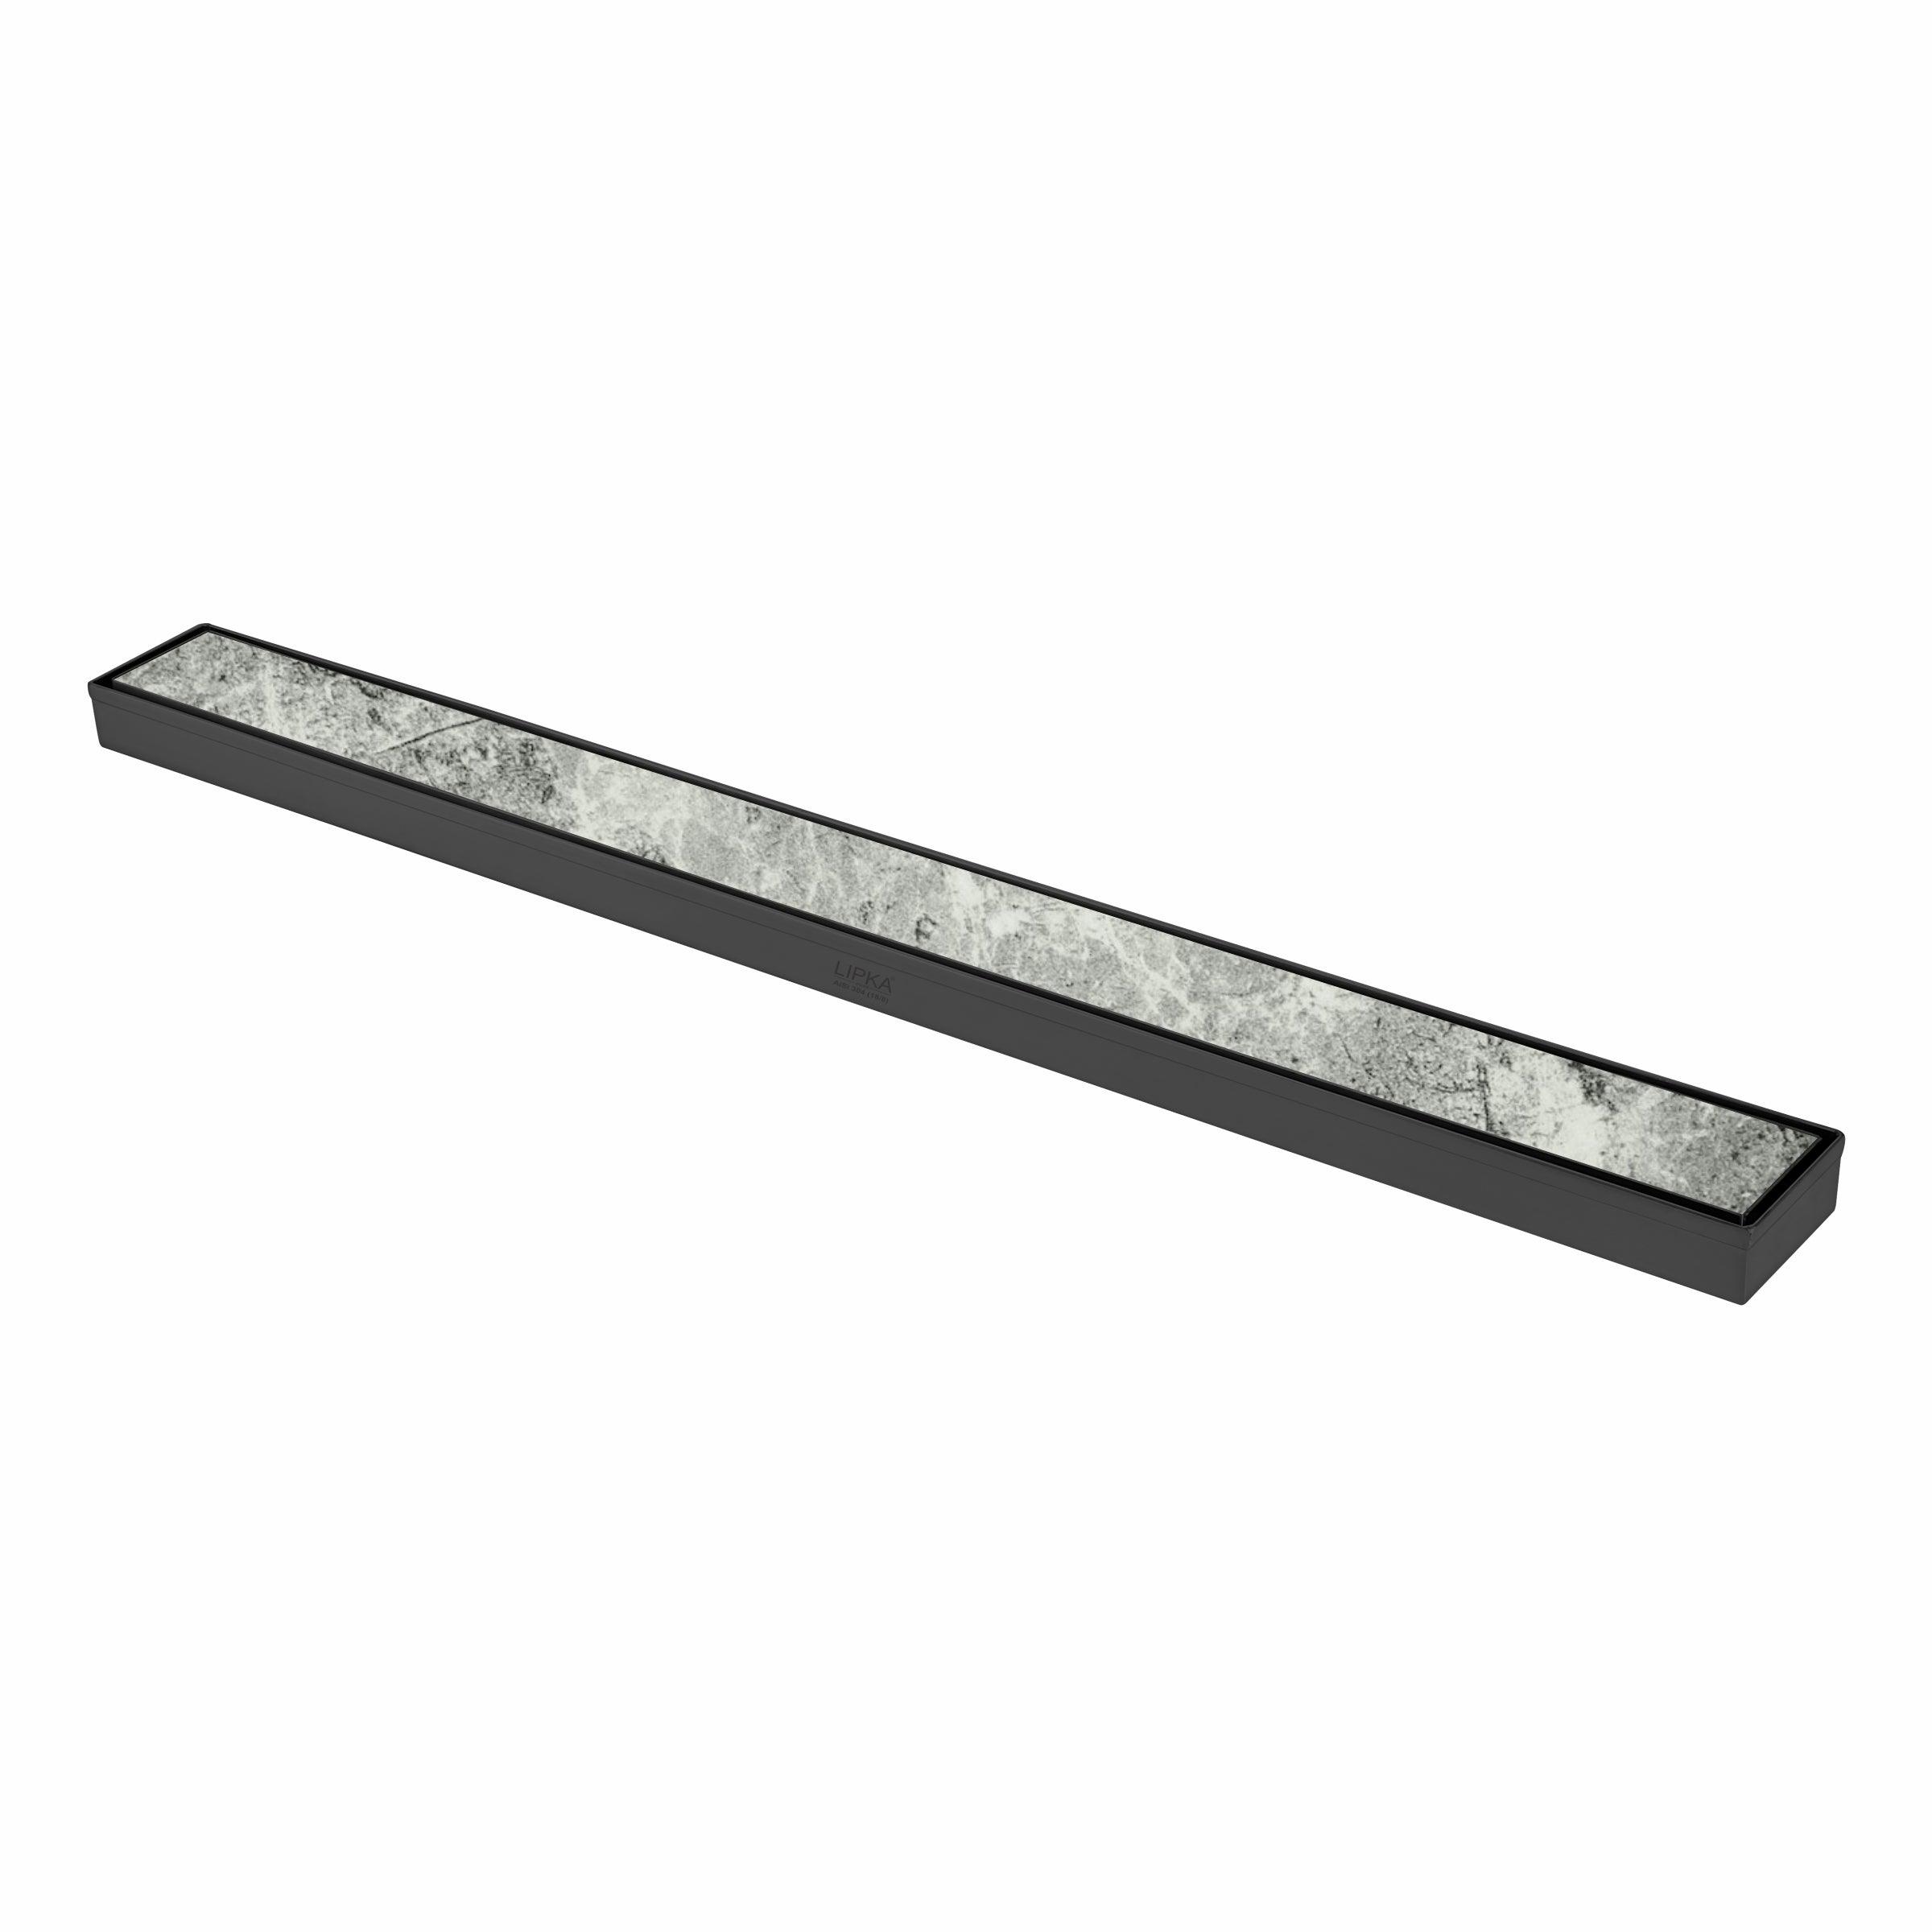 Tile Insert Shower Drain Channel - Black (40 x 2 Inches) 